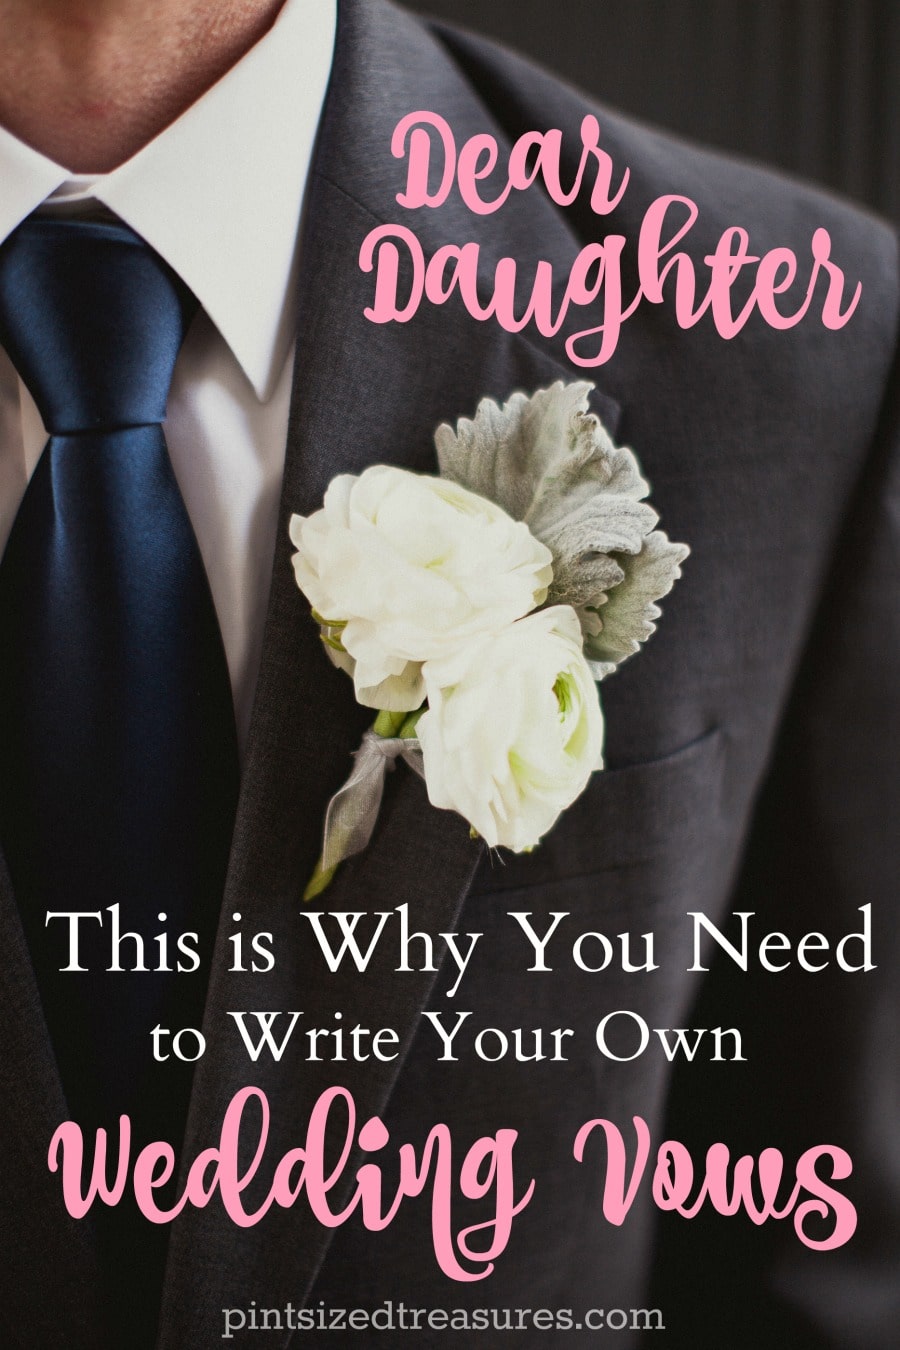 Dear daughter, this is why you need to write your own wedding vows